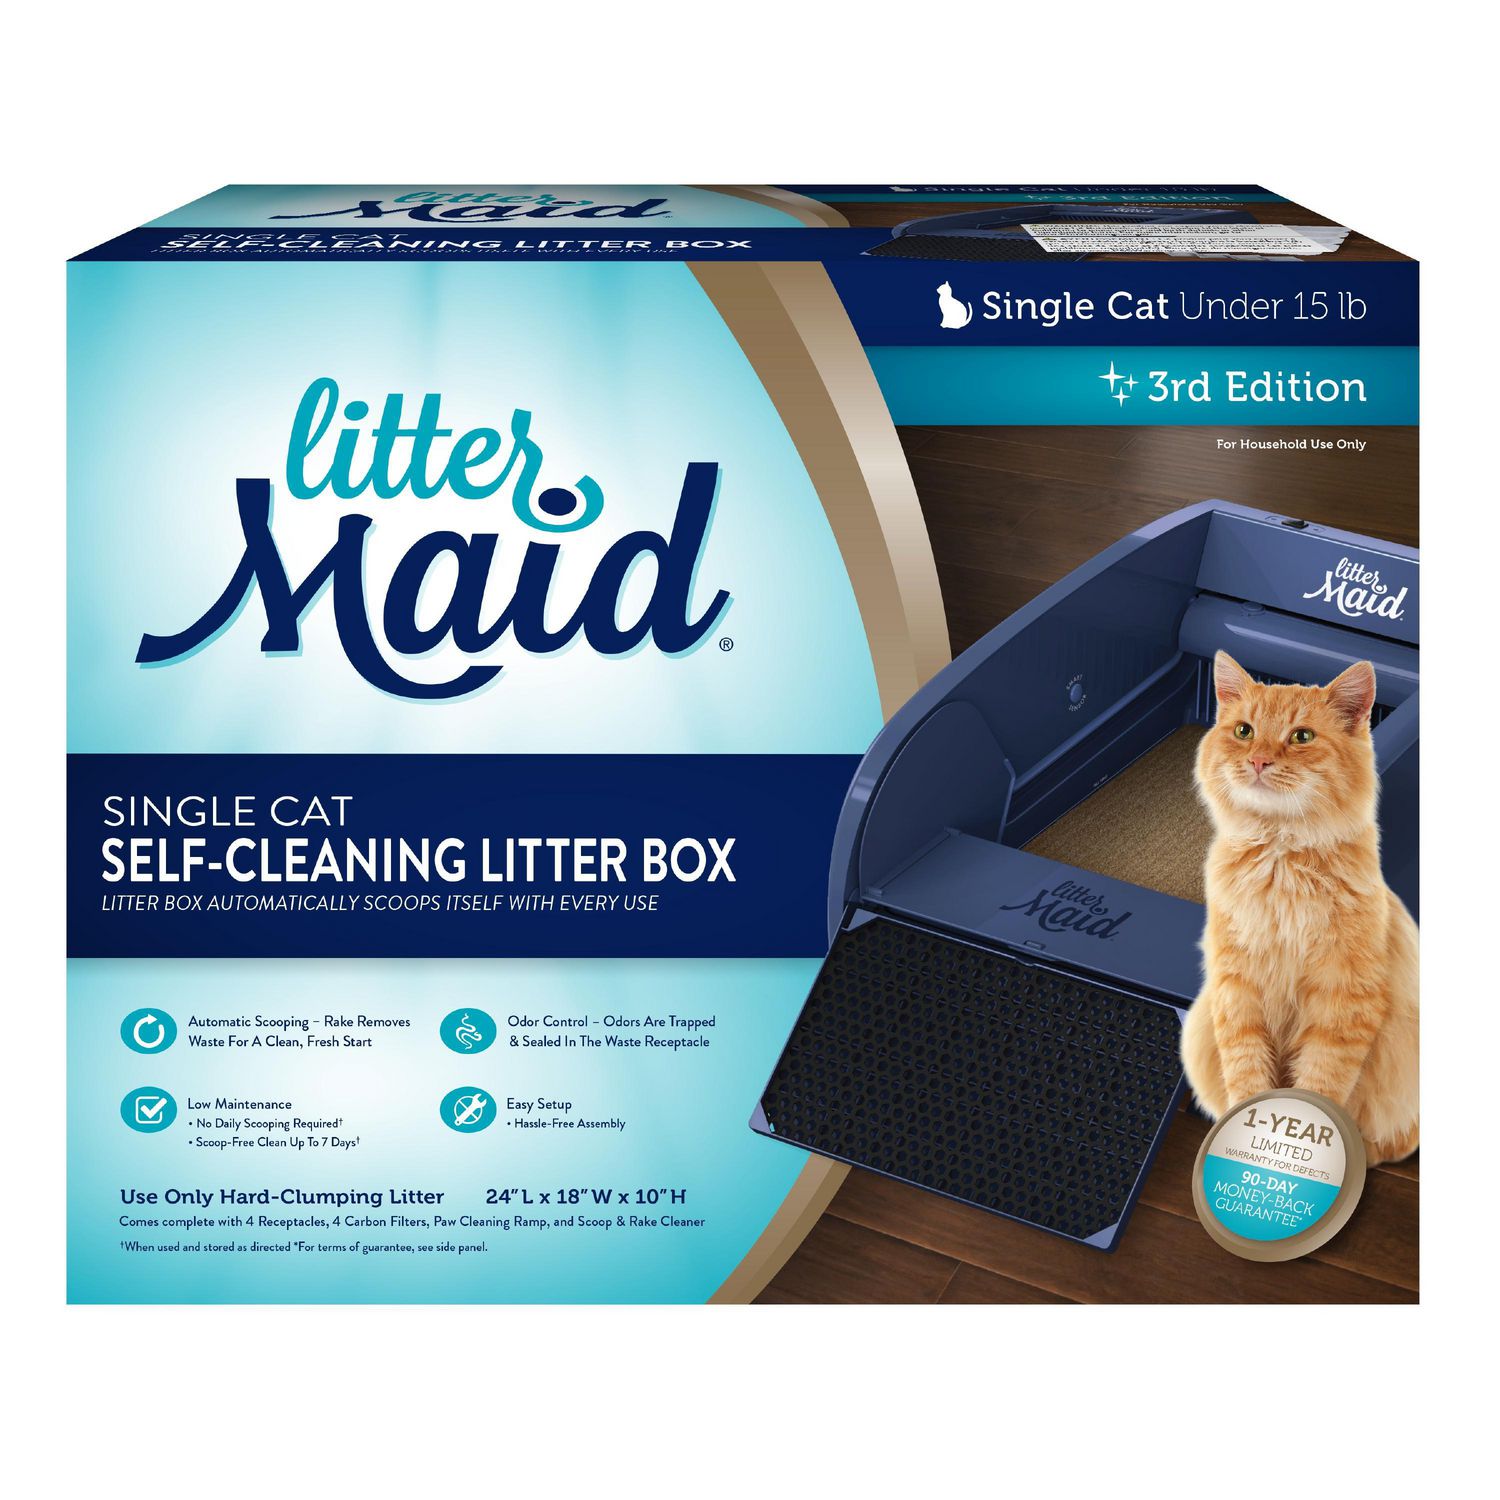 LitterMaid SelfCleaning Automatic Litter Box for Single Cat Households